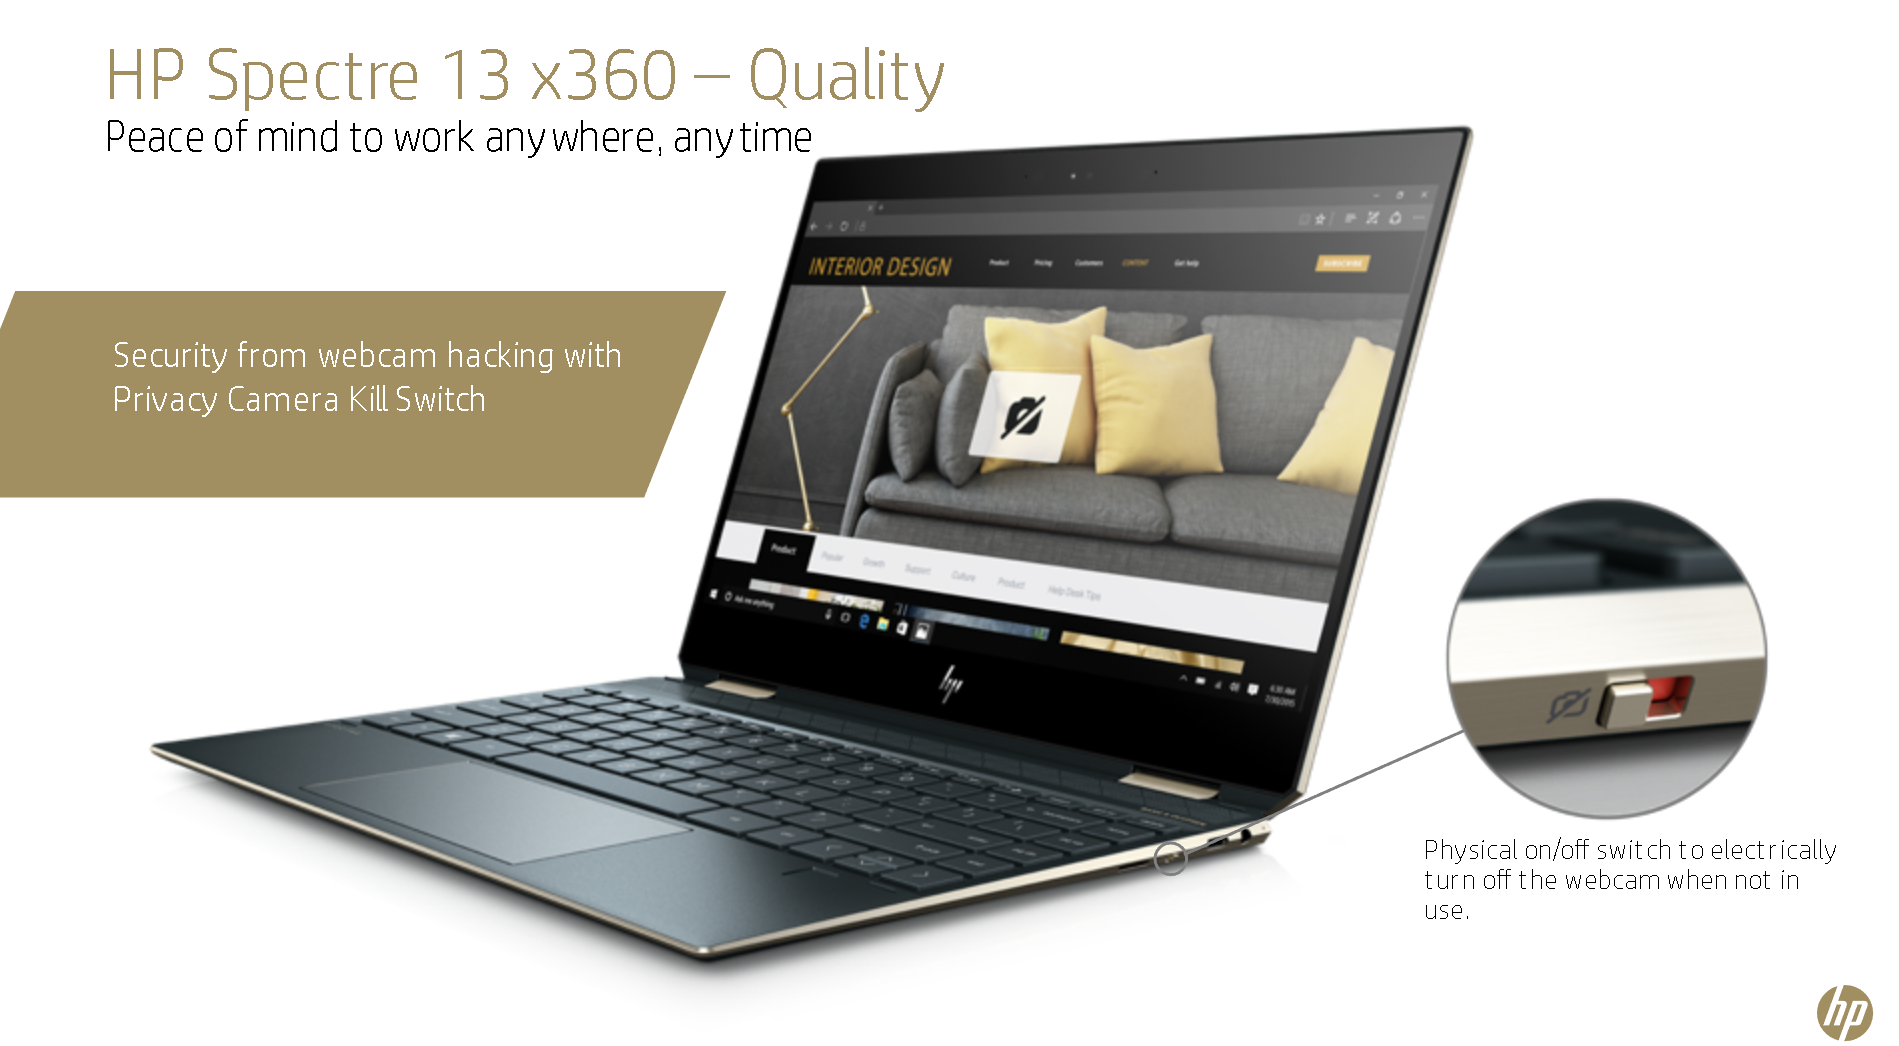 The New Latest HP Spectre 13 AP0082tu Whiskey Lake Microarchitecture Laptop